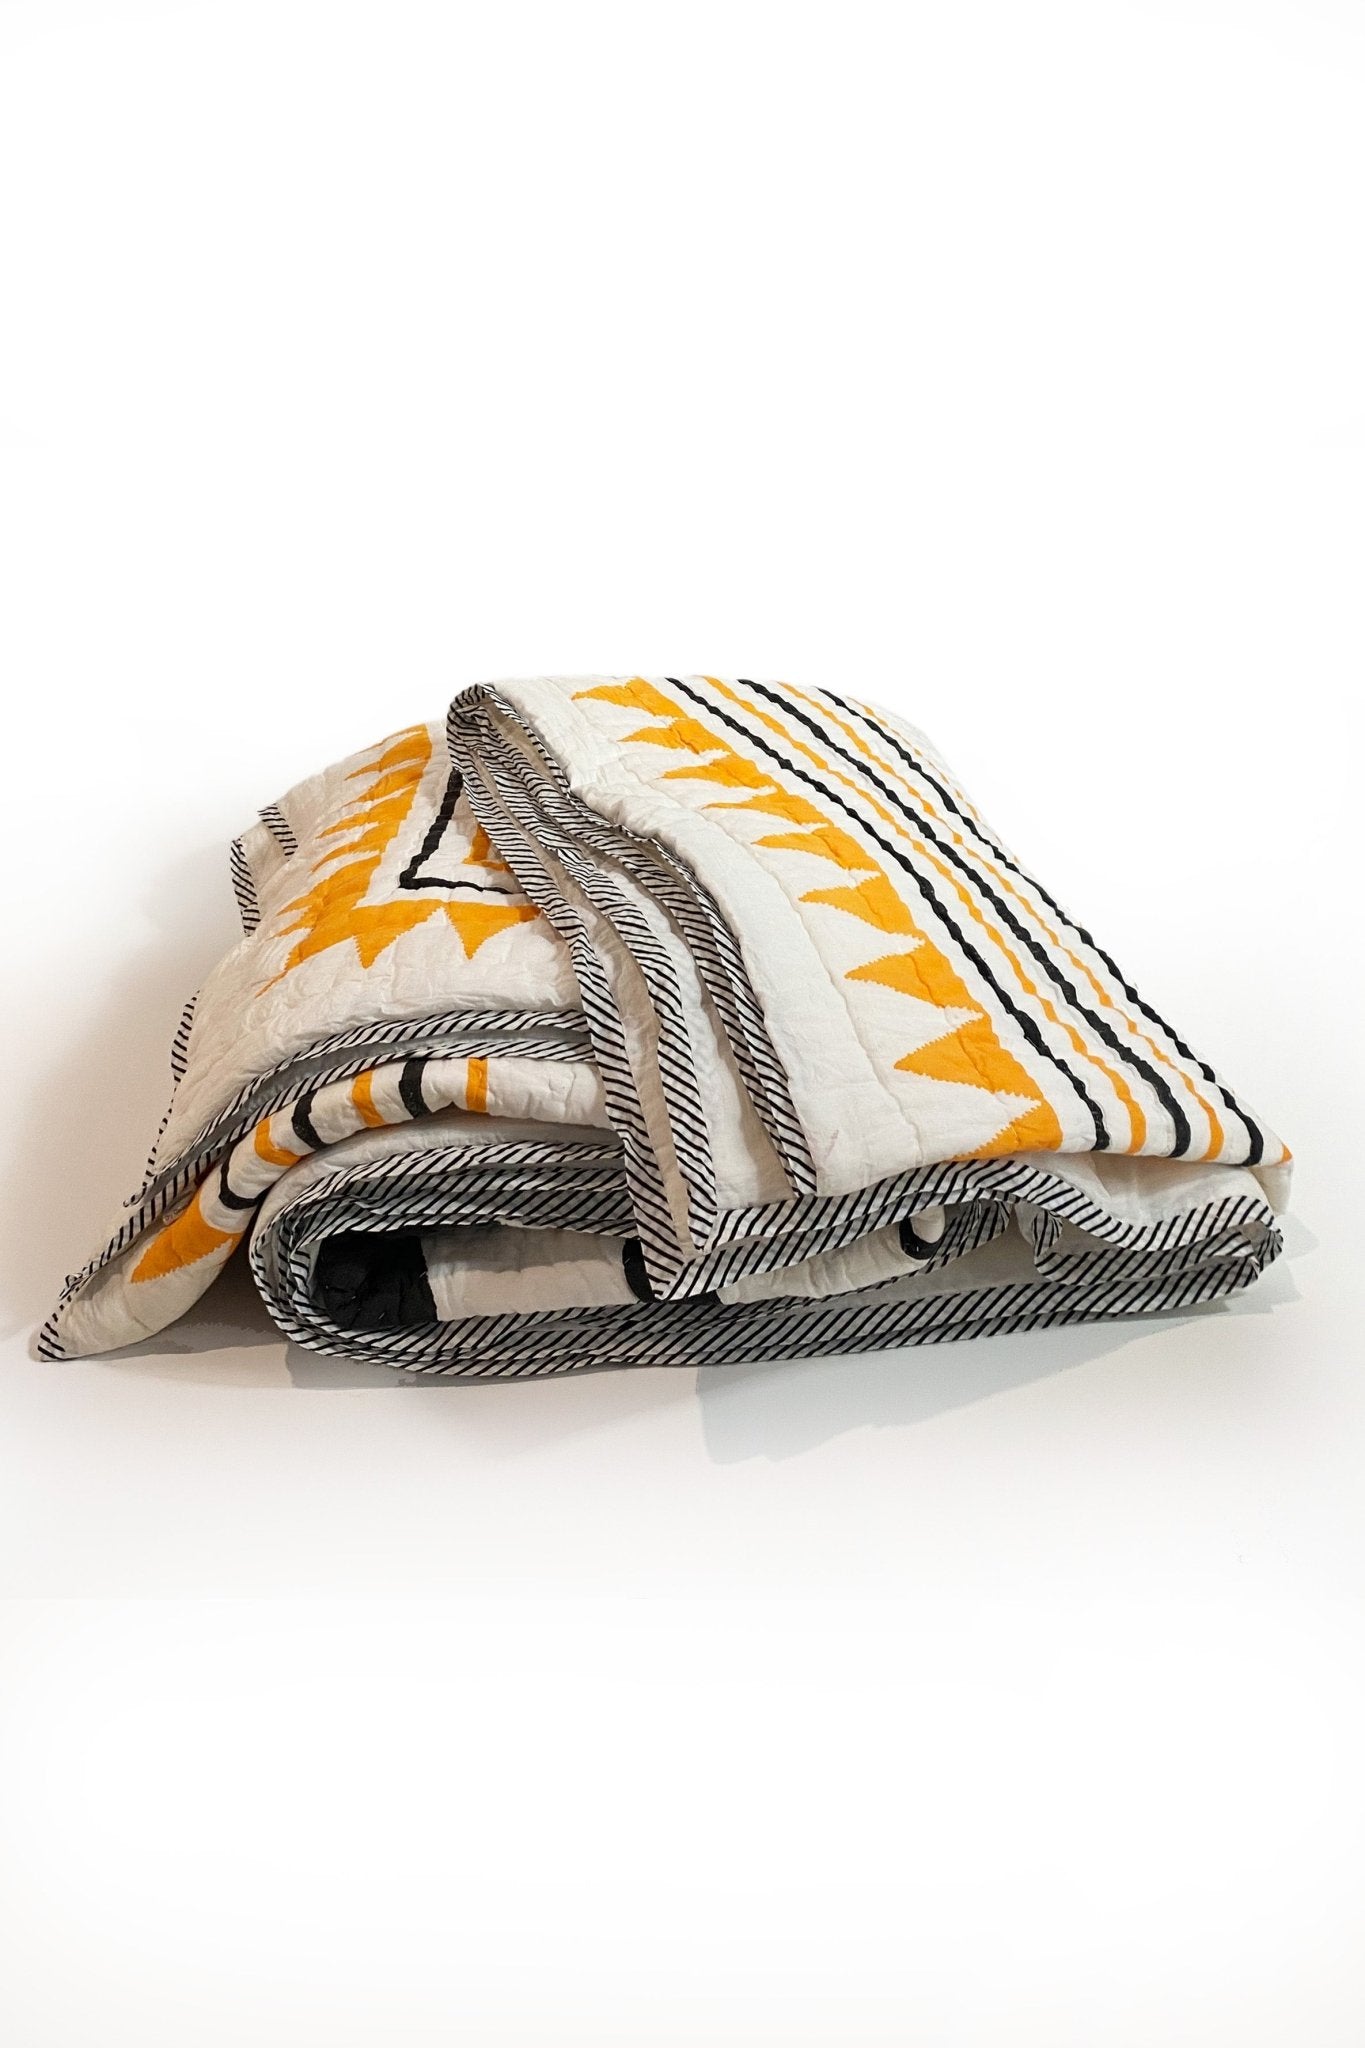 No 2 Block Printed Black, White and Yellow Geometric Quilted Bedspread - Biggs & Hill - Bedspread - Bedspread - black - blanket